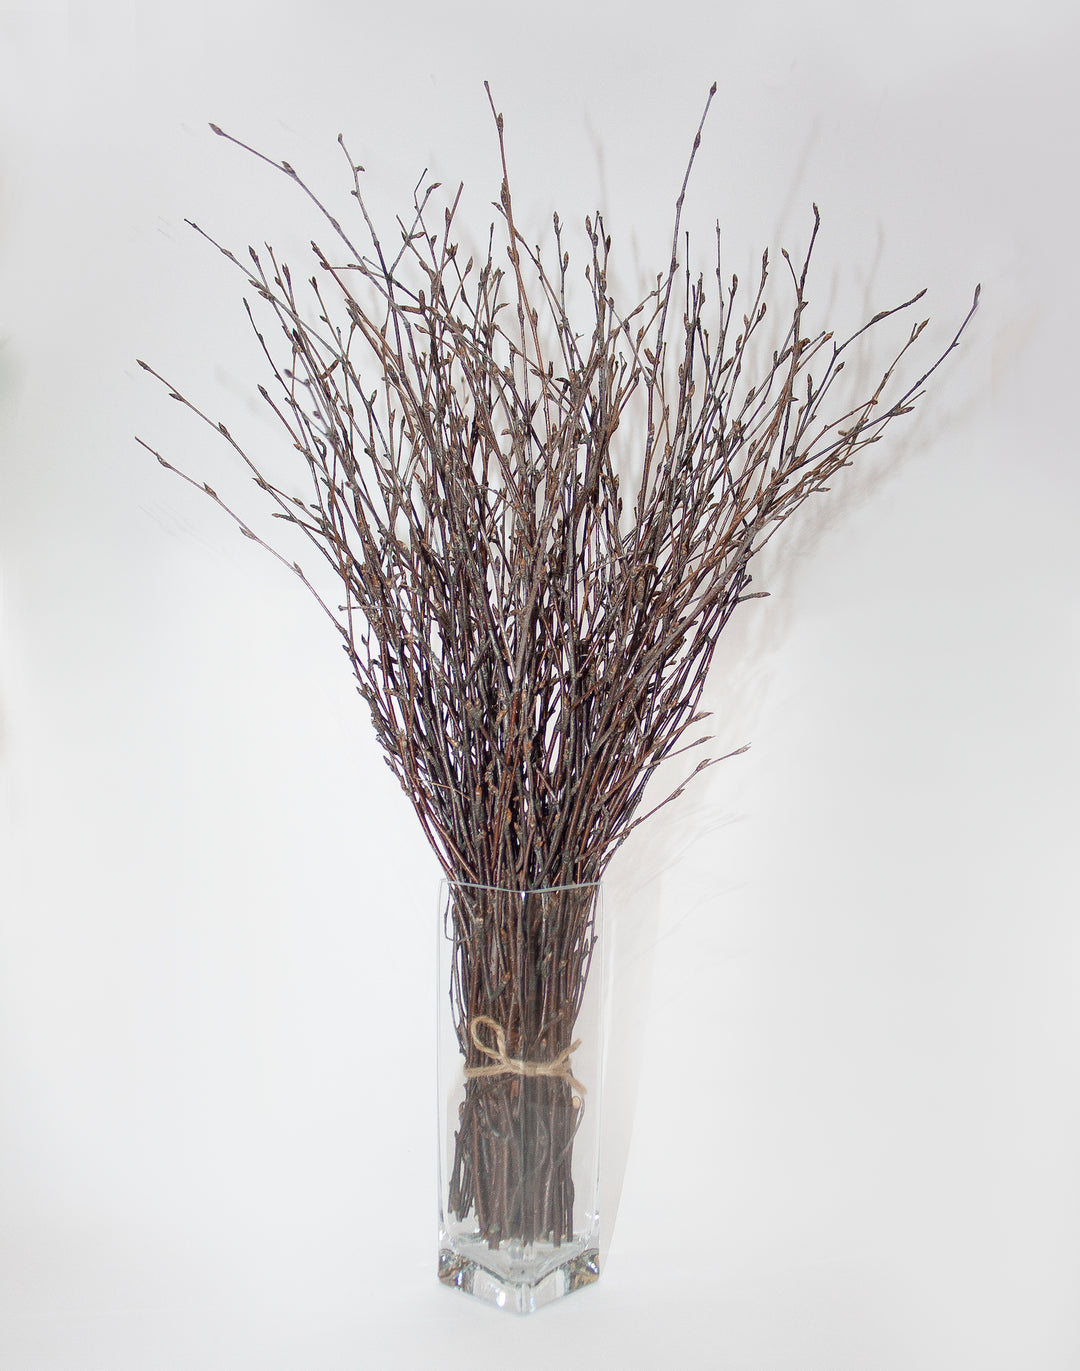 ECOVENIK 50 psc. Birch Twigs - 100% Natural Decorative Birch Branches for Vases, Centerpieces & DIY Crafts - Birch Sticks for Decorating